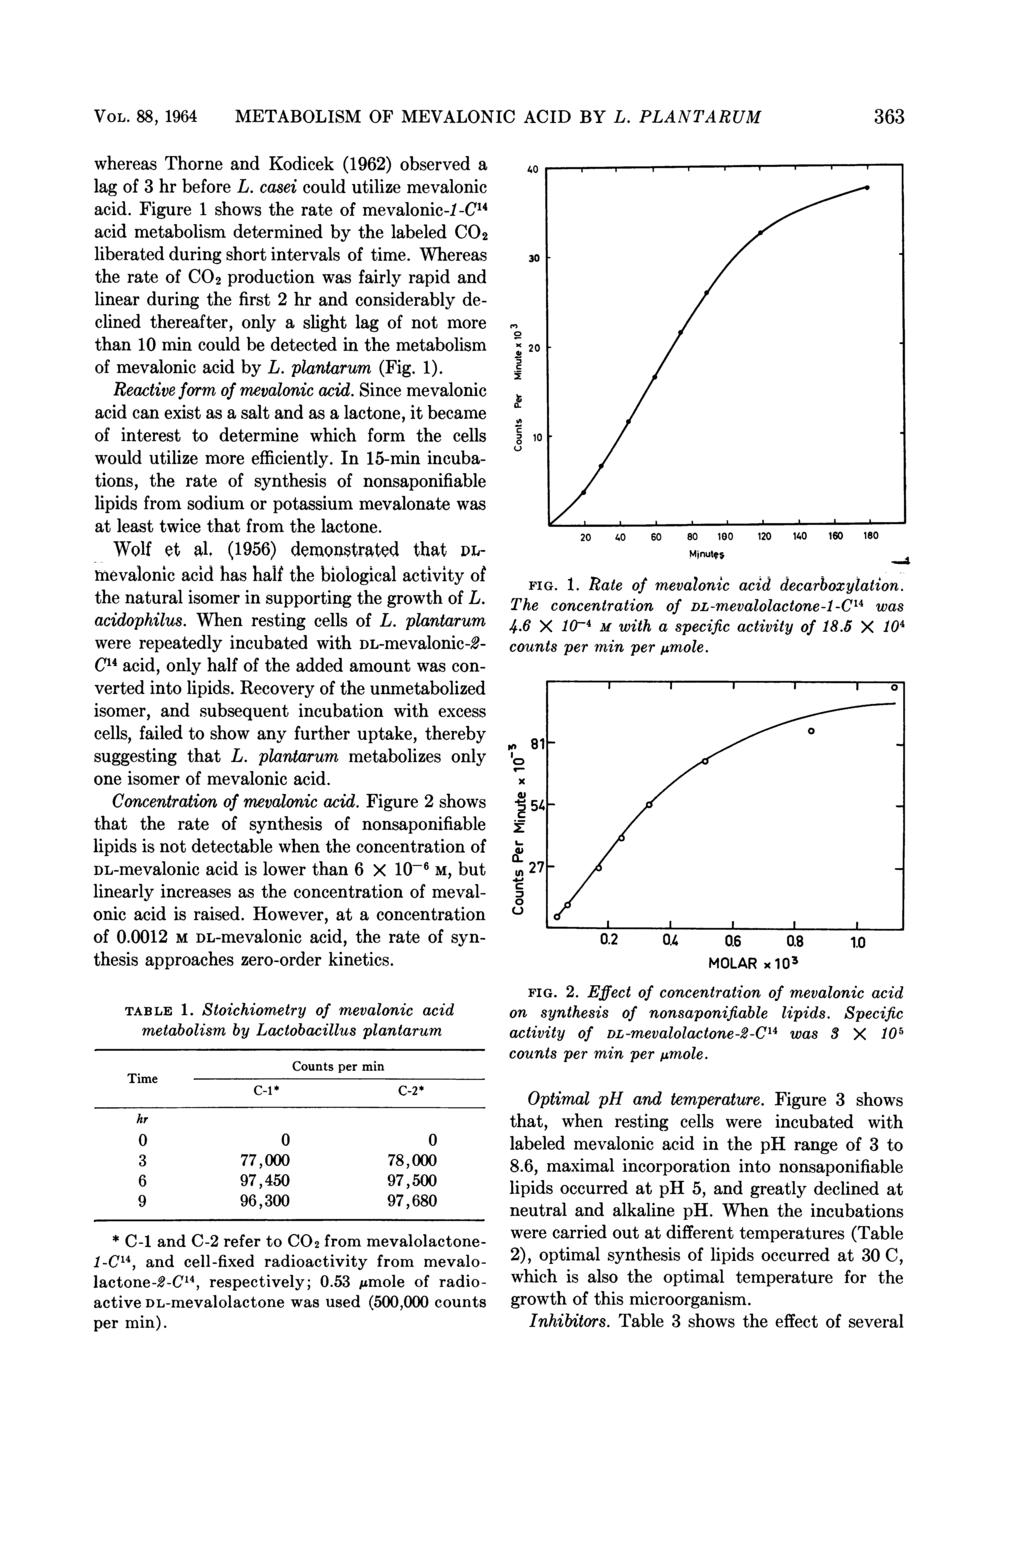 VOL. 88, 1964 METABOLISM OF MEVALONIC ACID BY L. PLANTARUM 363 whereas Thorne and Kodicek (1962) observed a lag of 3 hr before L. casei could utilize mevalonic acid.